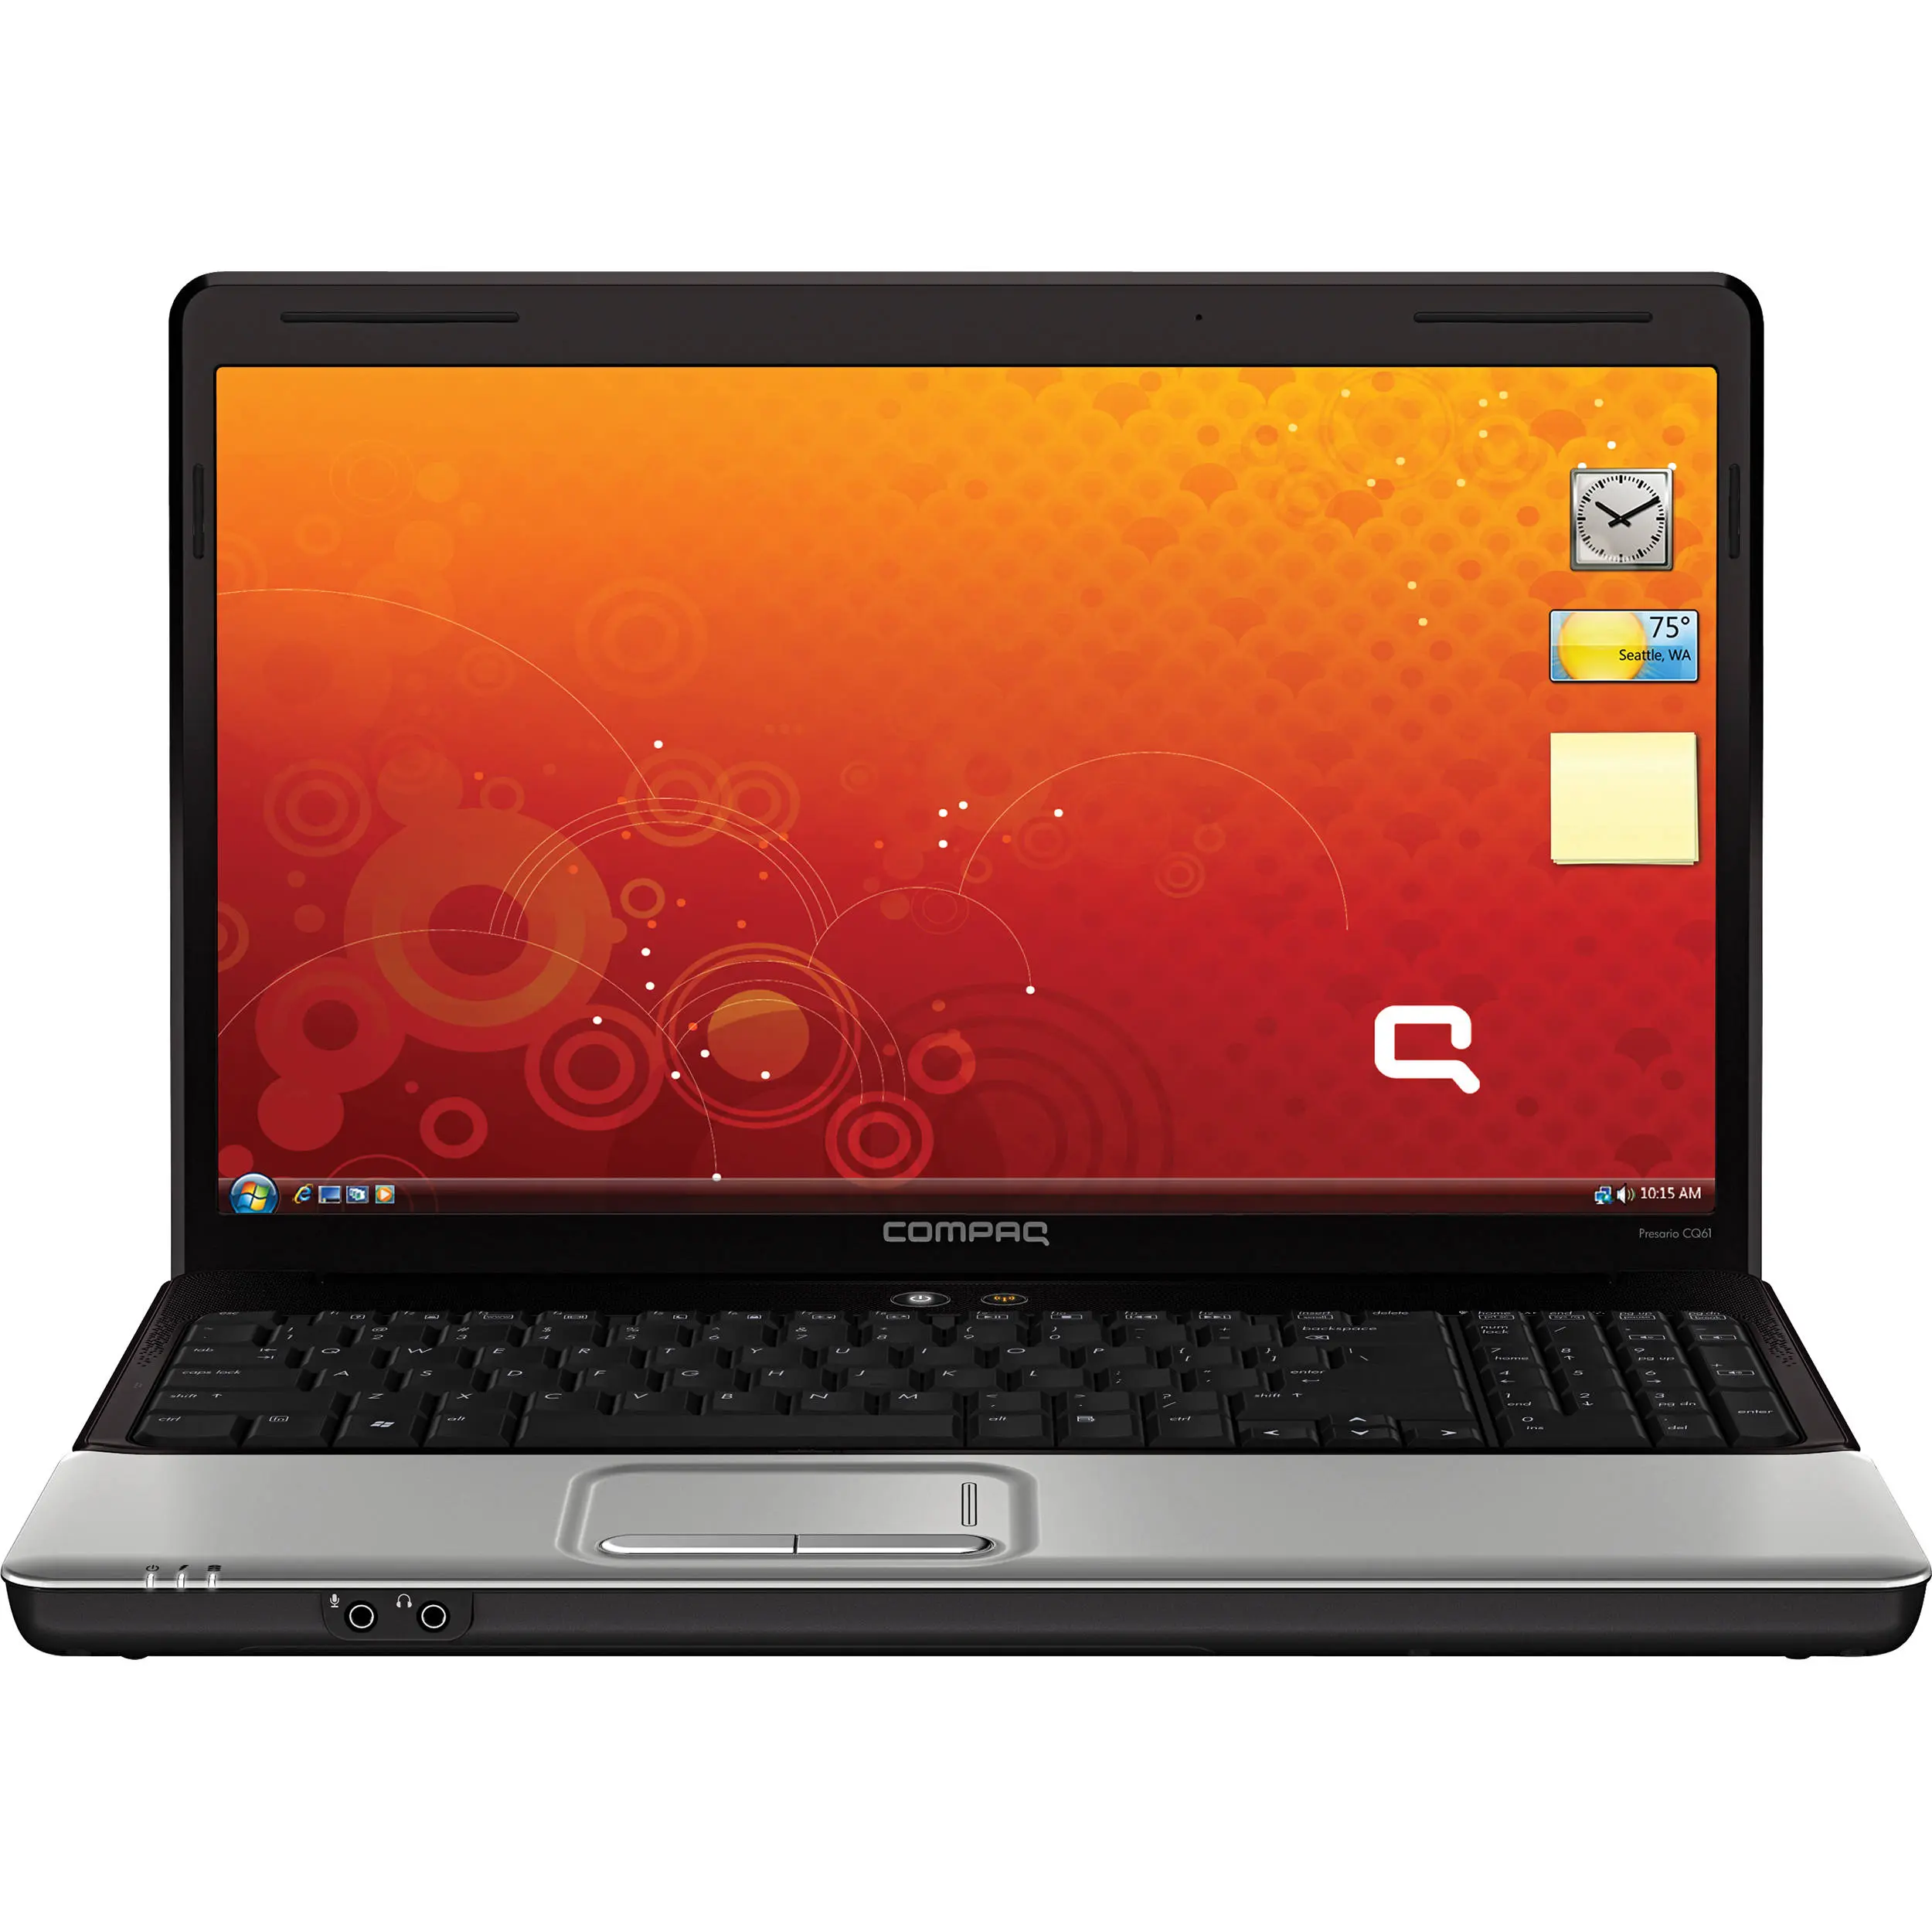 Hewlett packard presario cq61 notebook pc - affordable and reliable laptop